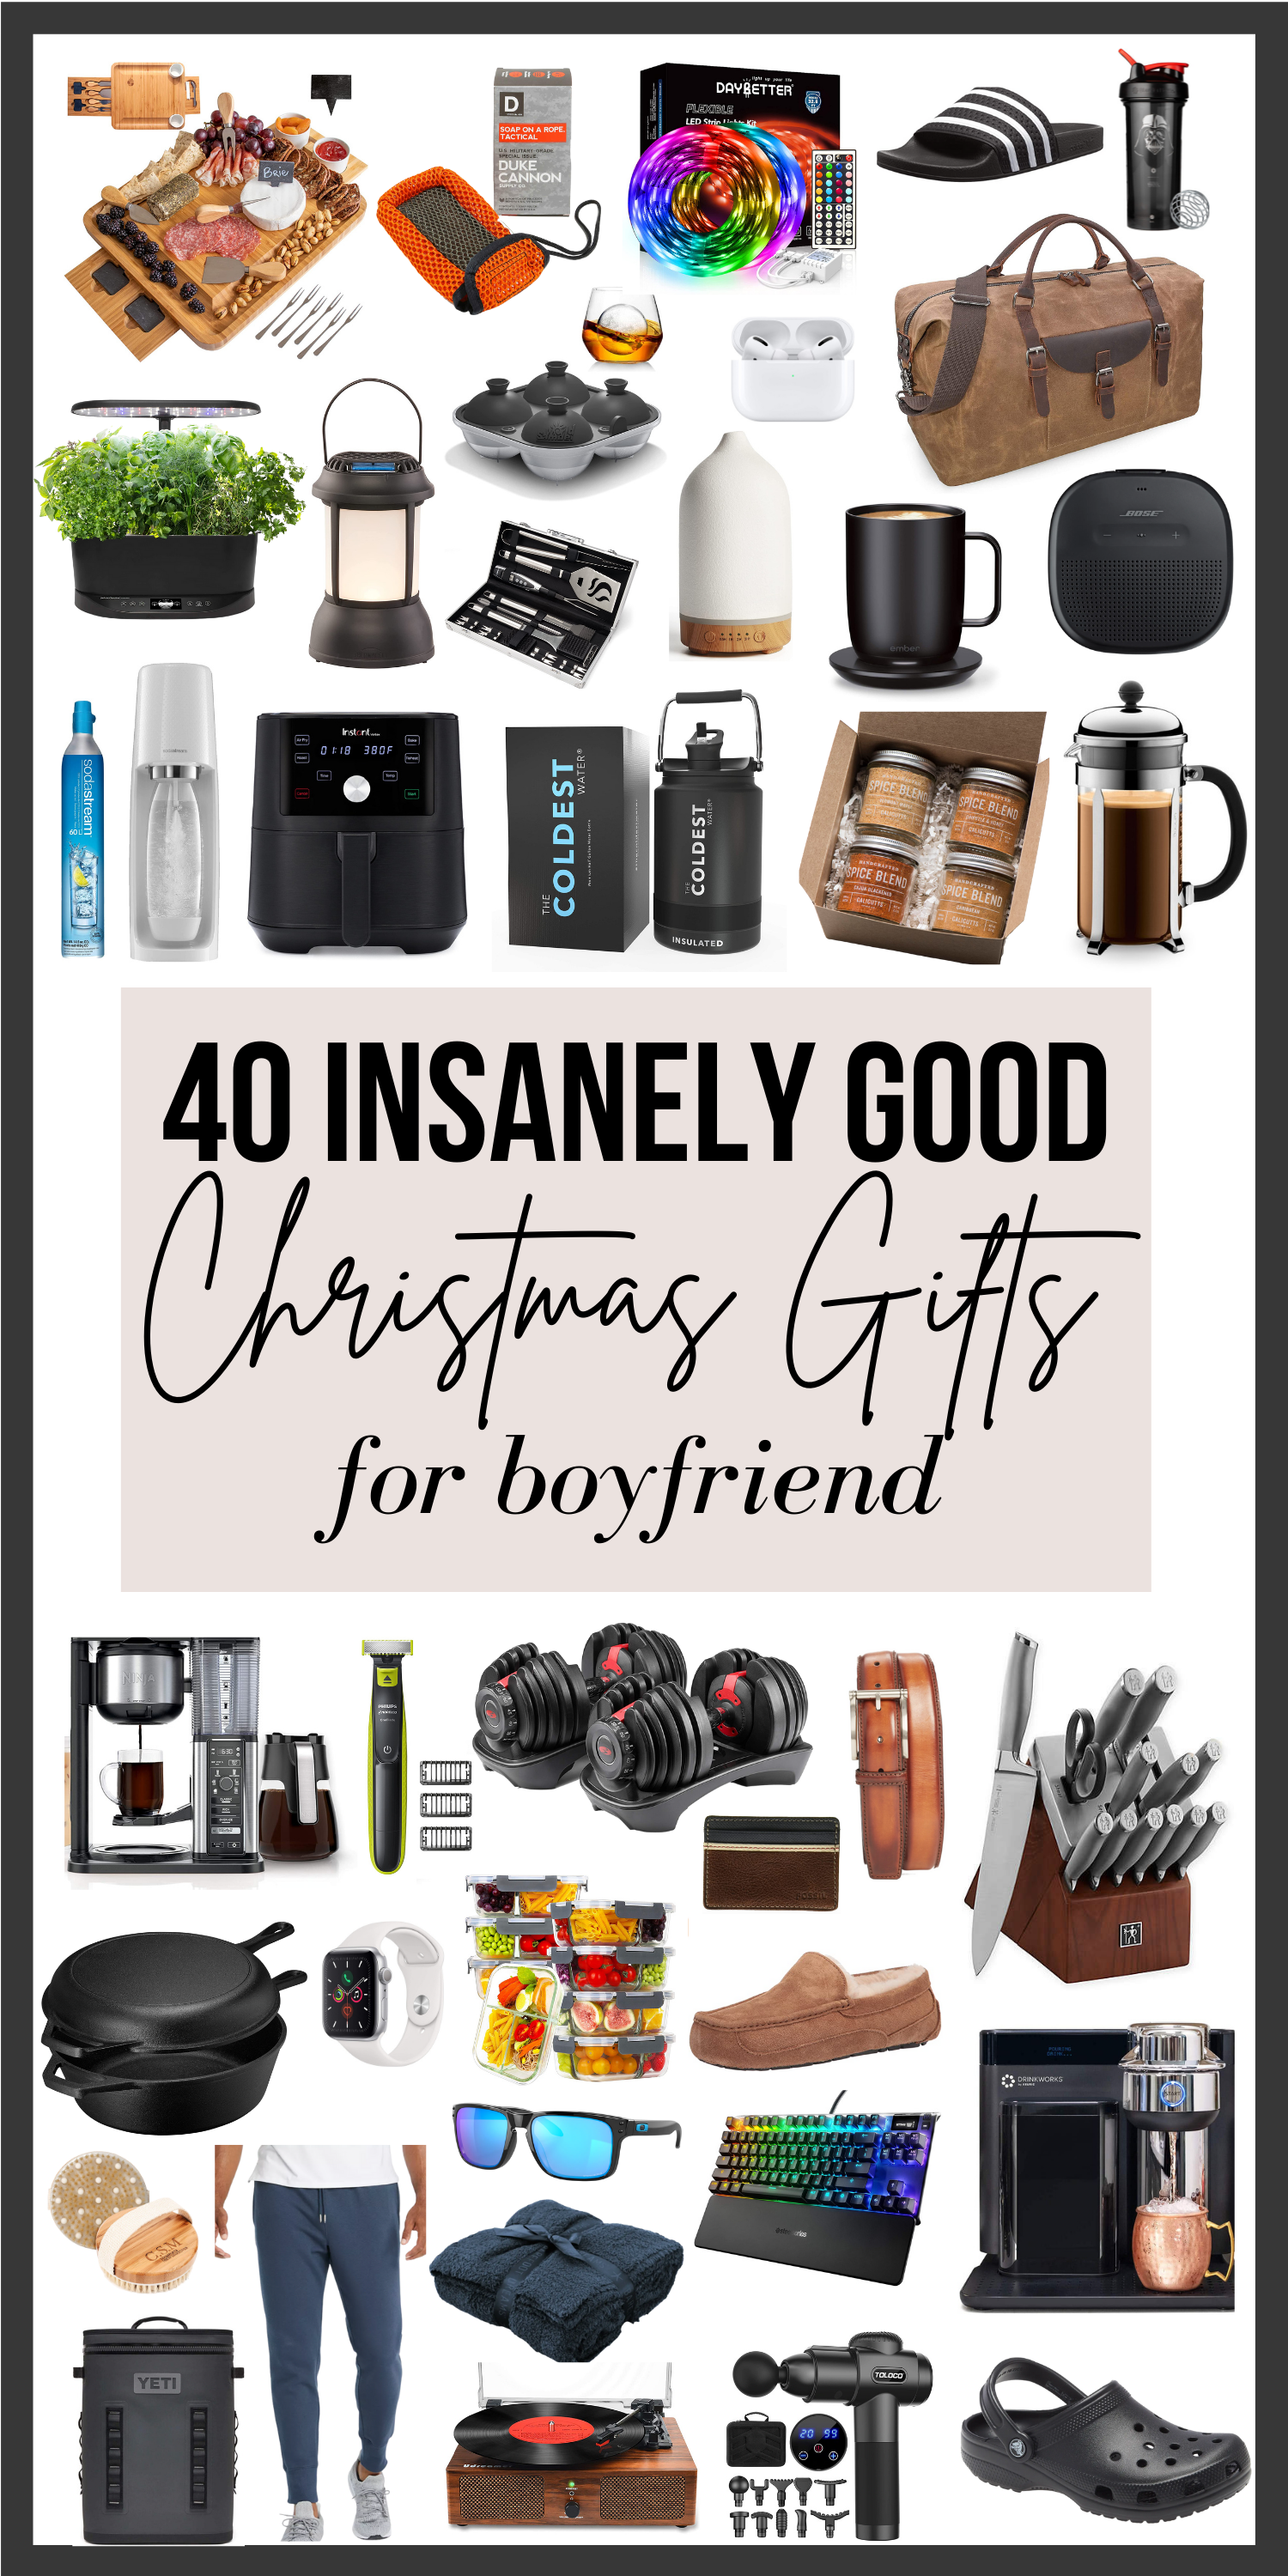 36 Thoughtful Christmas Gift Ideas for Boyfriend (Most Popular List)   Boyfriend gifts, Christmas gifts for boyfriend, Meaningful christmas gifts